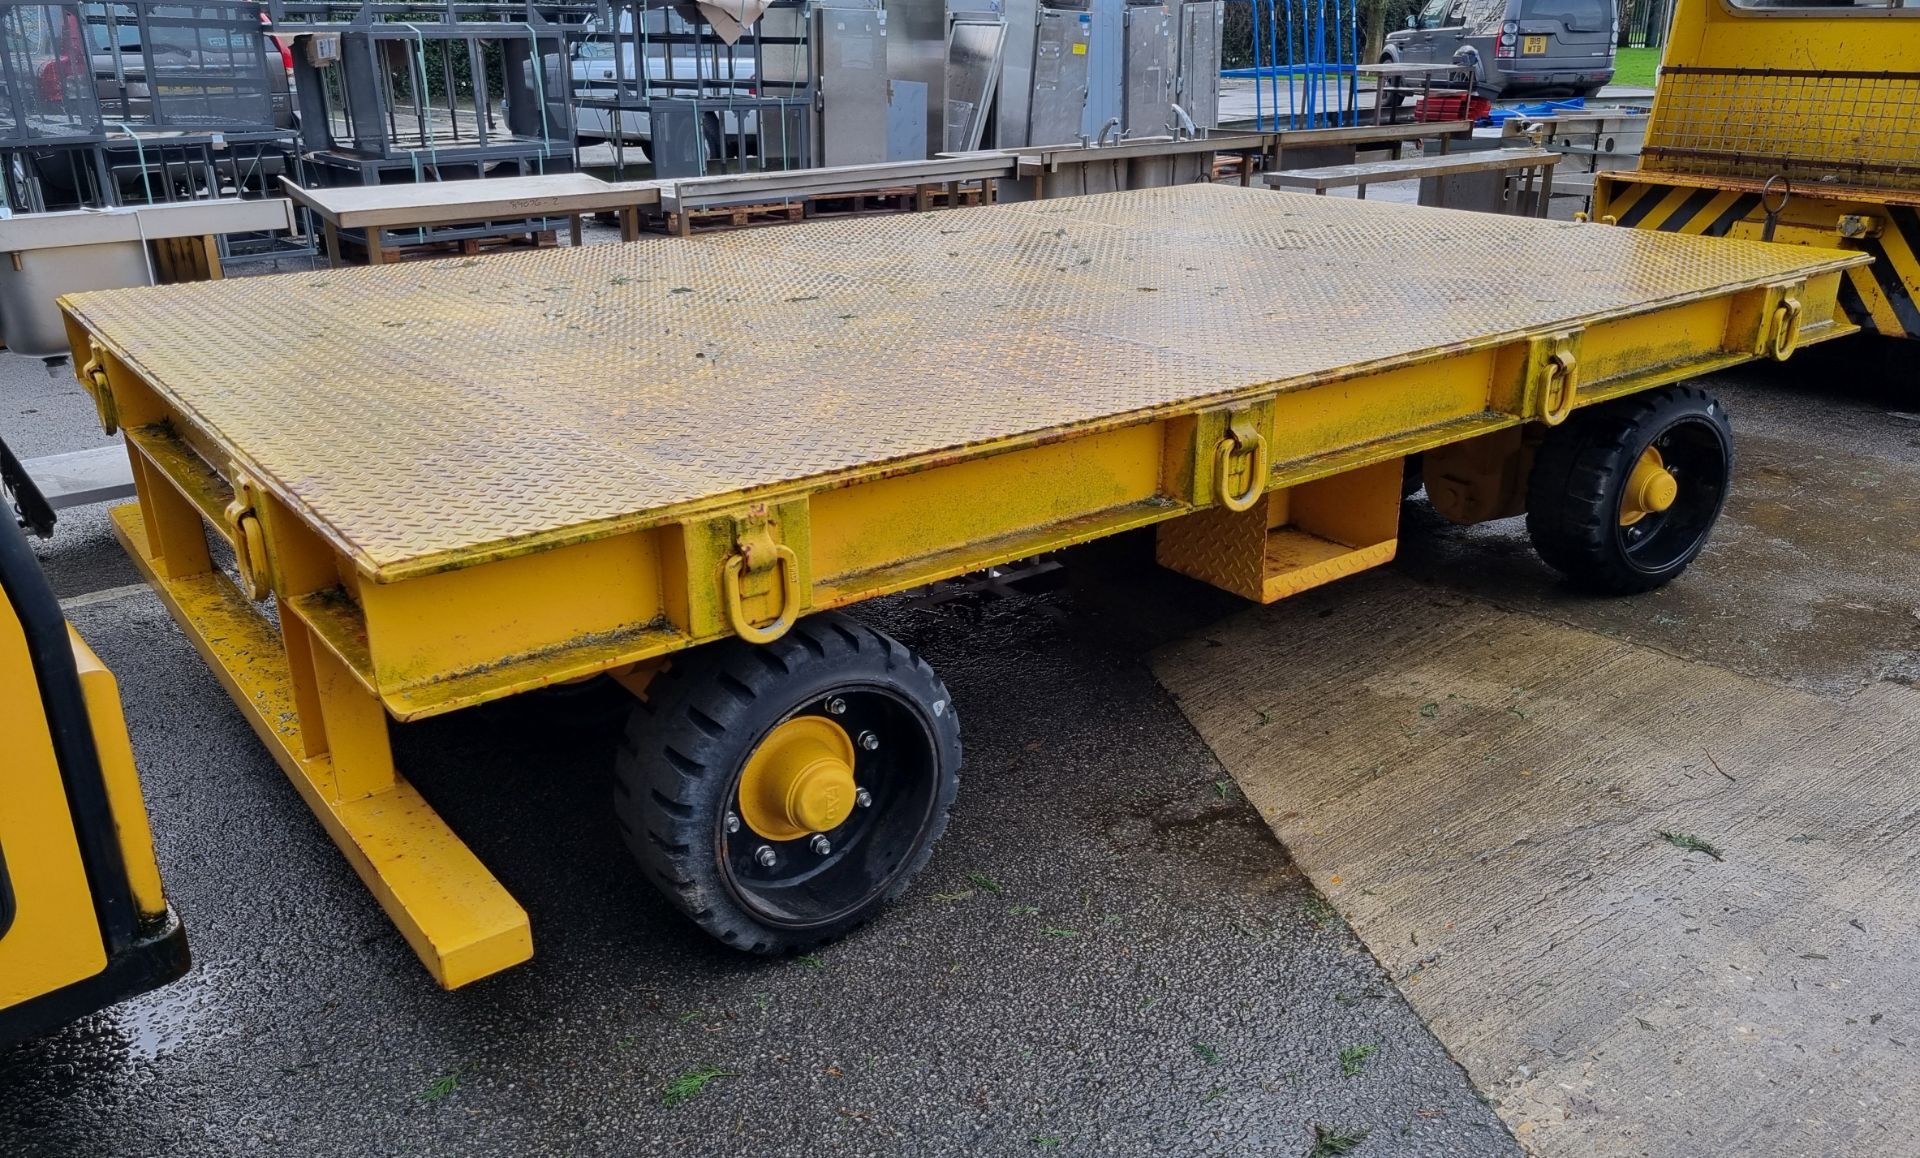 Reliance Mercury tow / tug vehicle - 1448 hours used with Alexander trailers - IP3000ST trailer - Image 27 of 32